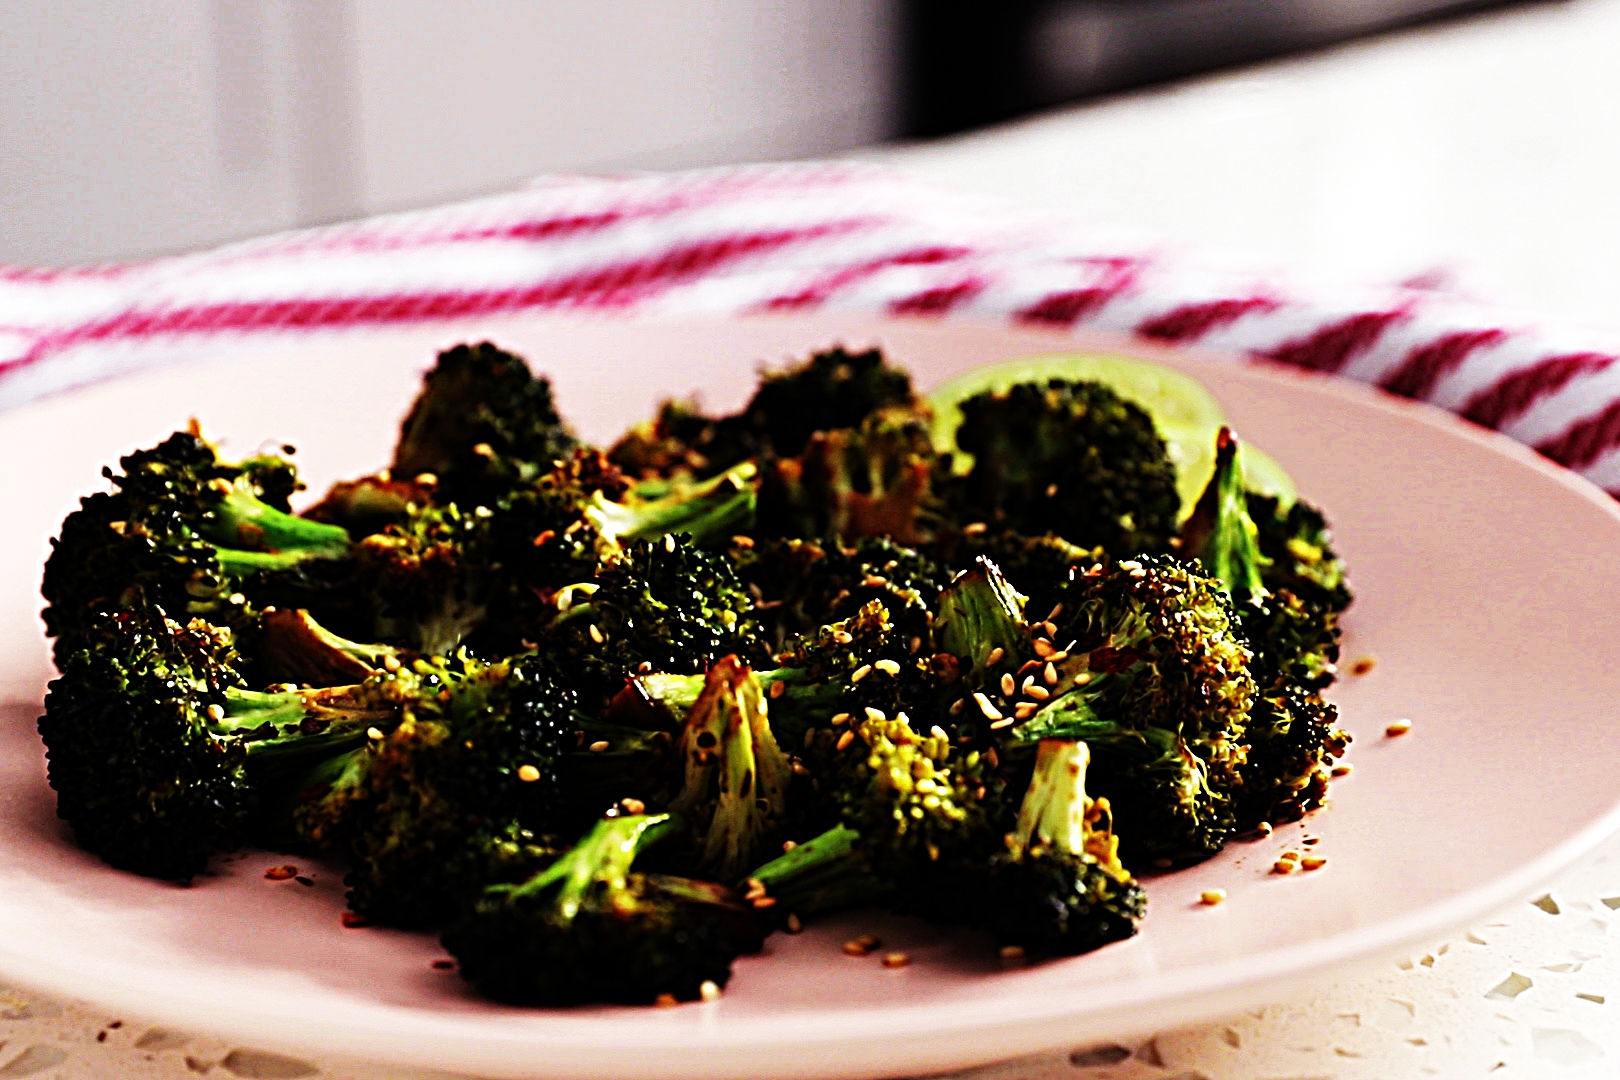 Stupid-Easy Recipe for Asian Sesame Roasted Broccoli (#1 Top-Rated)